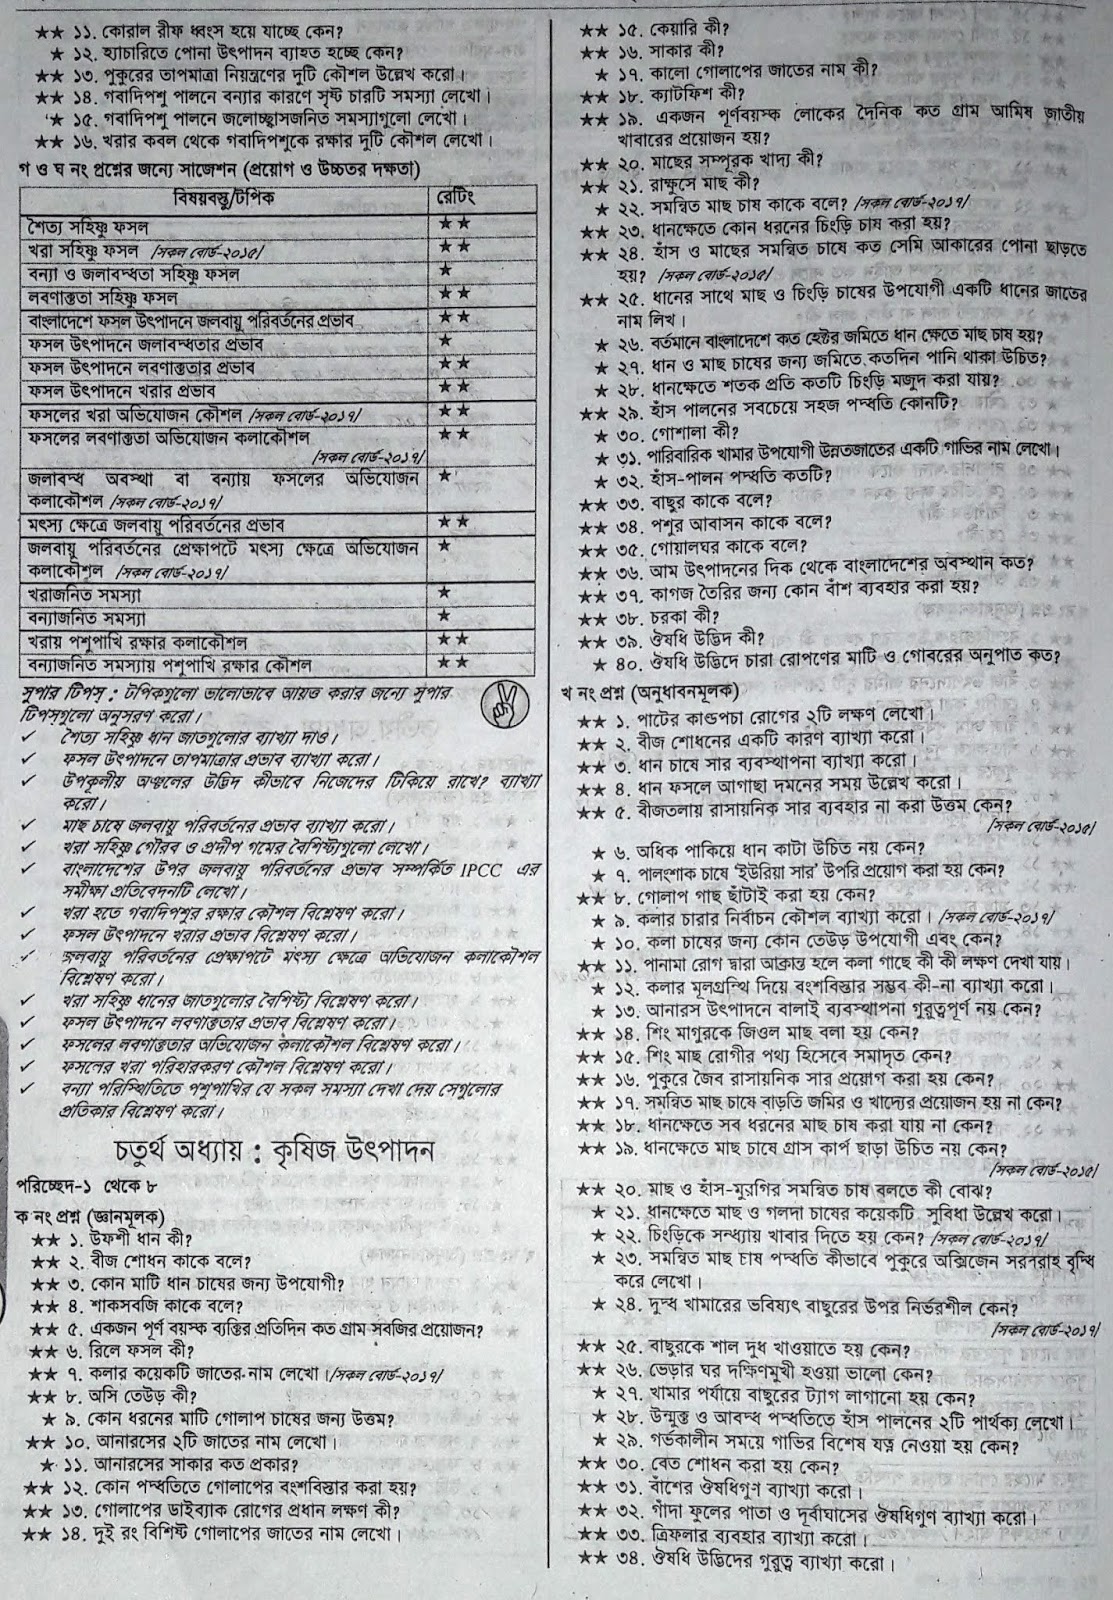 SSC Agriculture Studies suggestion, question paper, model question, mcq question, question pattern, syllabus for dhaka board, all boards